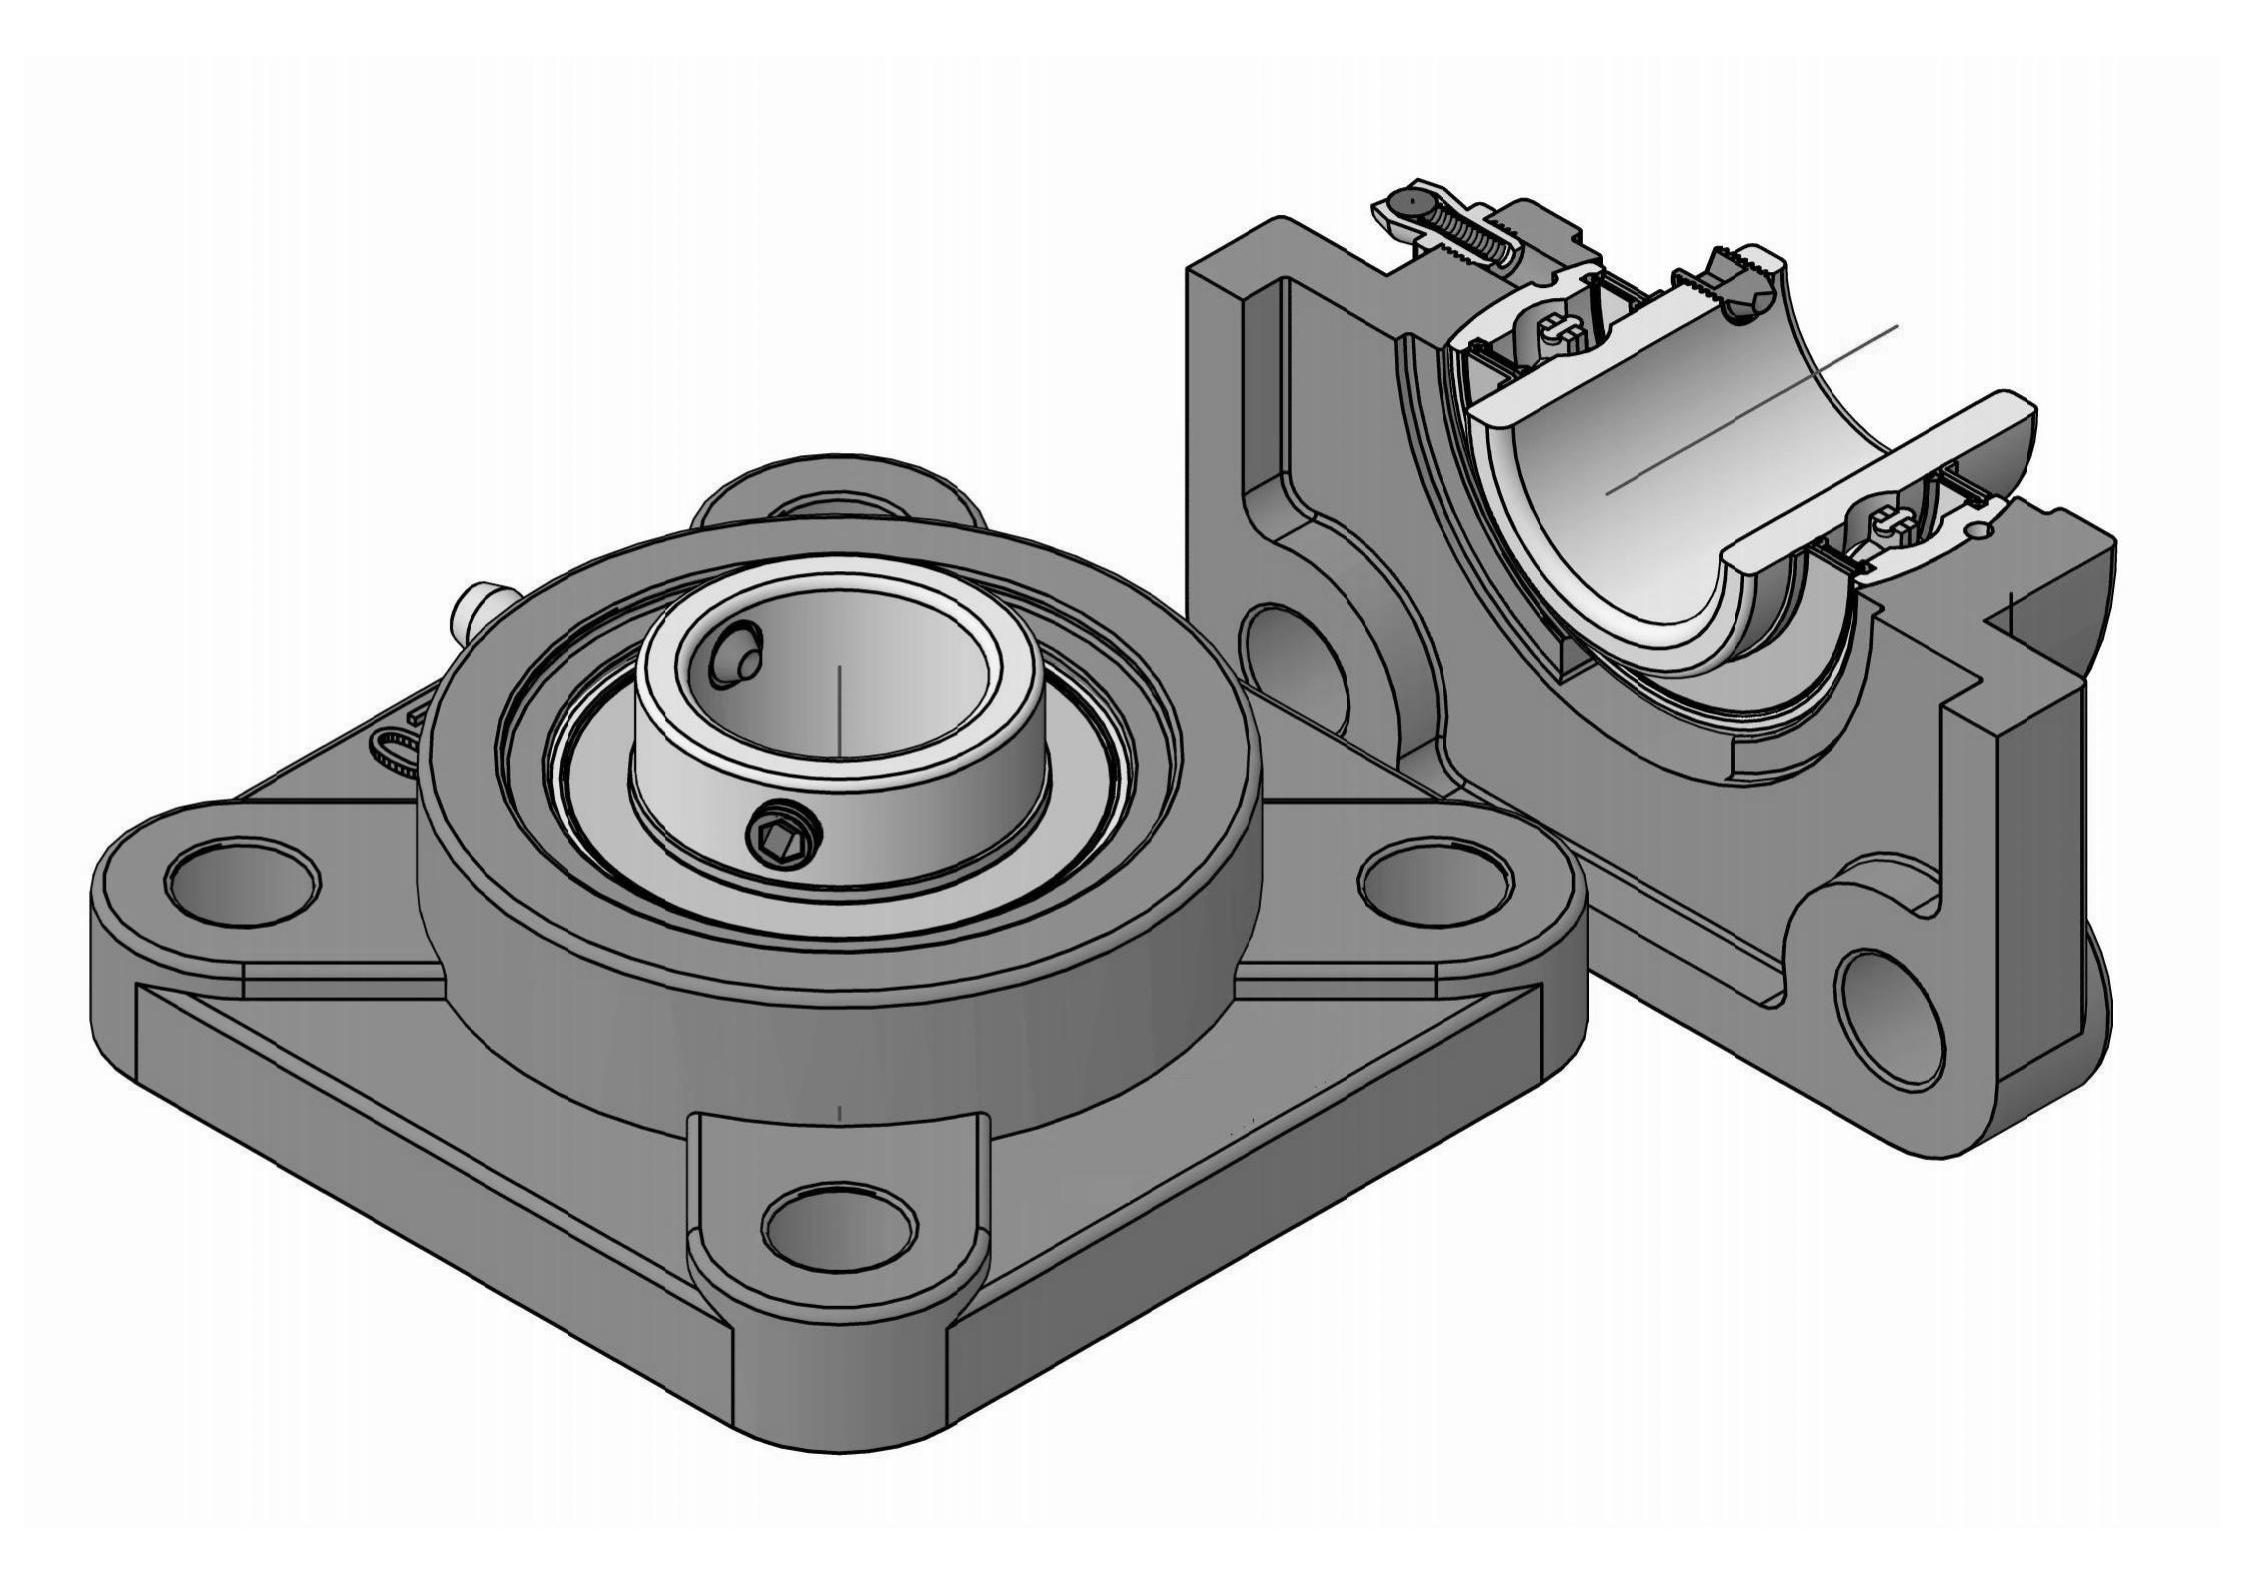 UCFX14-44 four Bolt Square flange bearing units with 2-3/4 inch bore